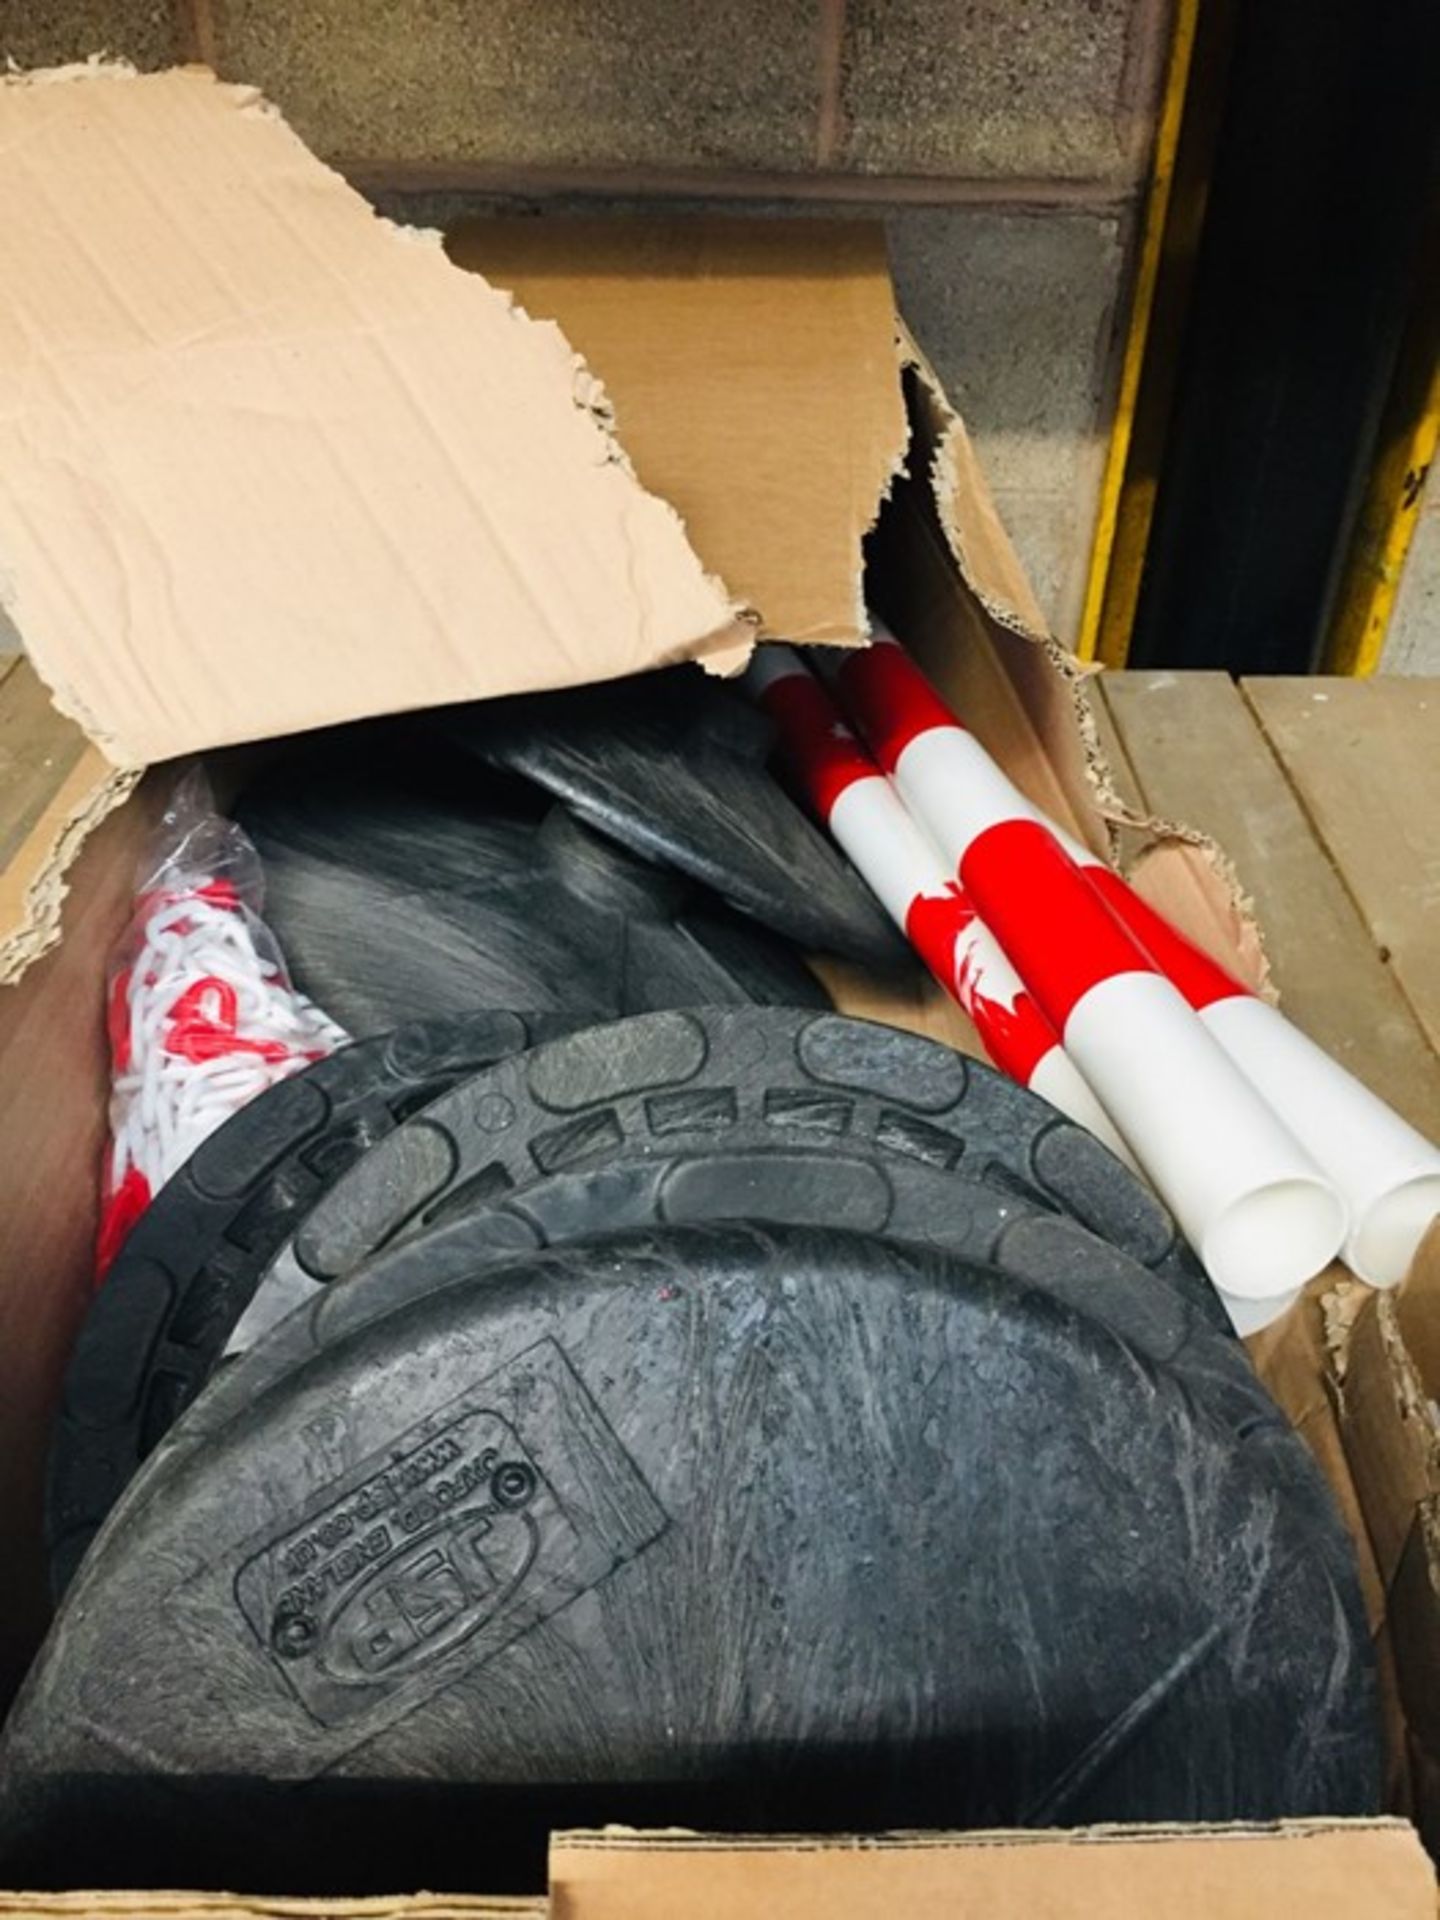 1 LOT TO CONTAIN A BOX OF RED AND WHITE SAFETY BOLLARDS WITH LINK CHAIN - L2